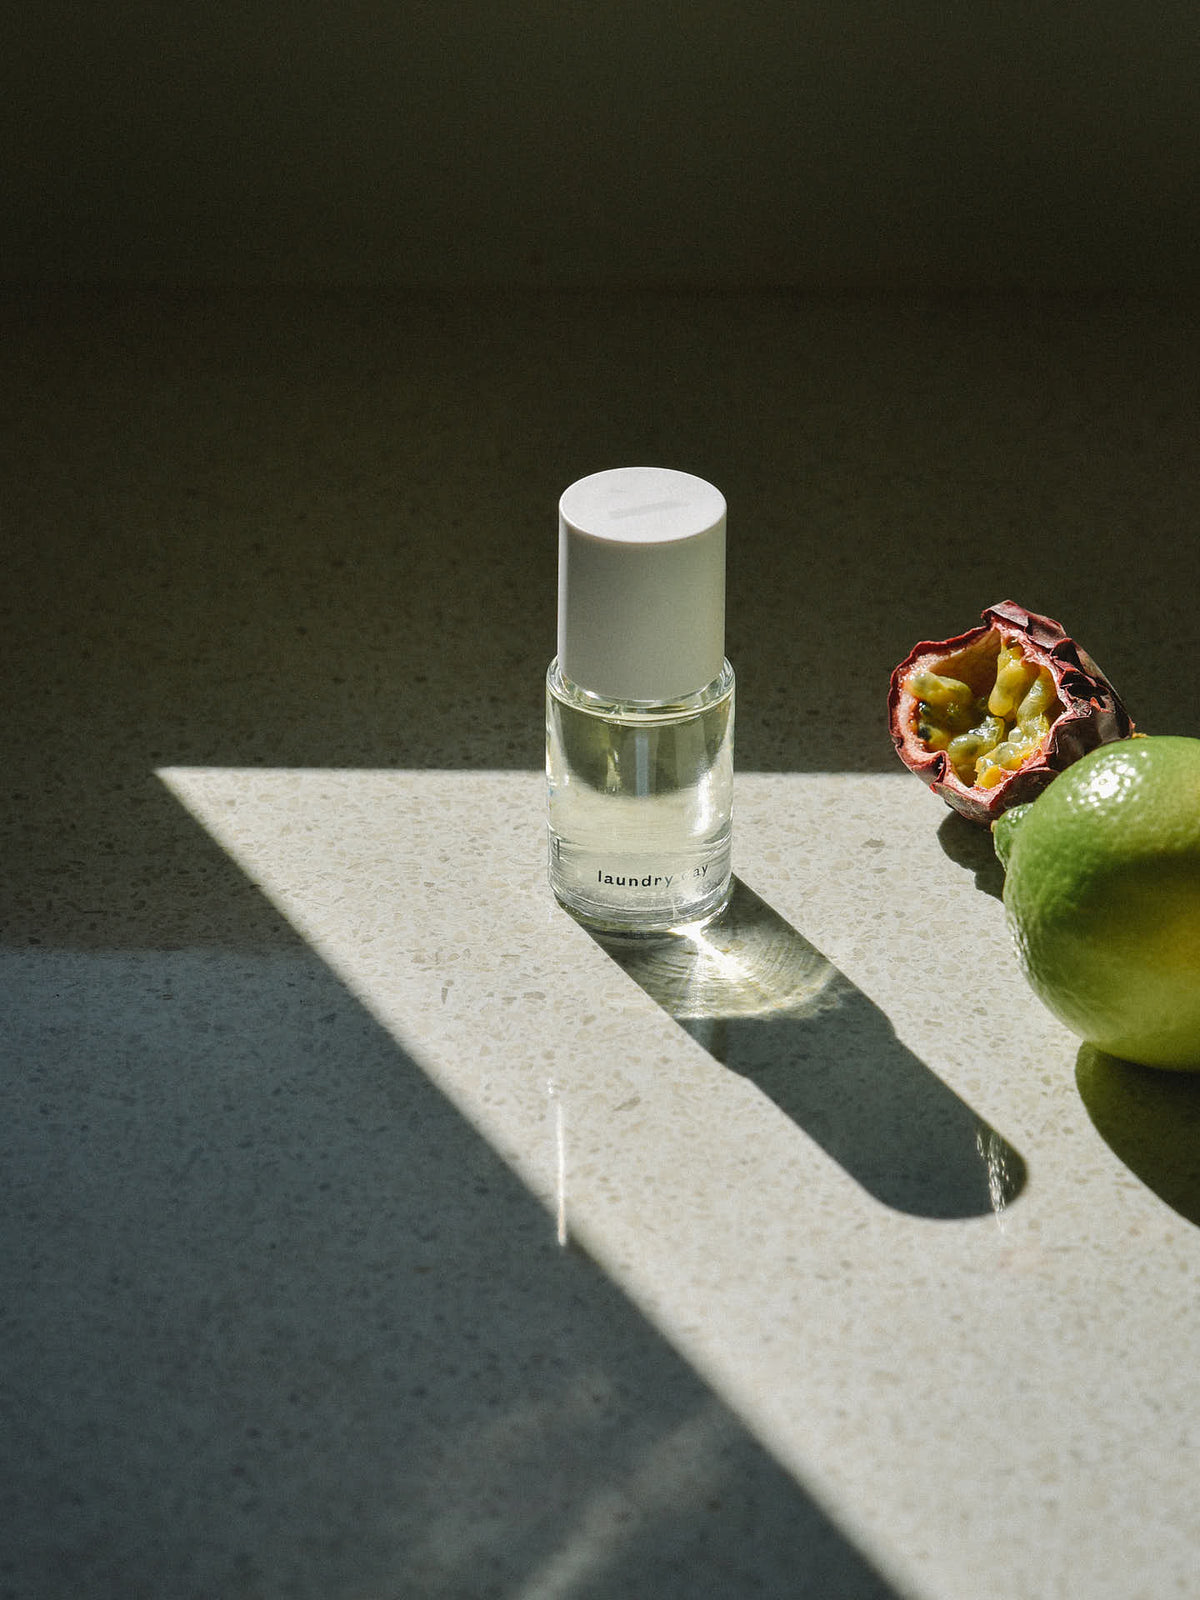 A small bottle of Abel’s Laundry Day – a verdant, sun-filled citrus rests on a stone surface beside a green lime and a halved passion fruit, lit by sunlight.